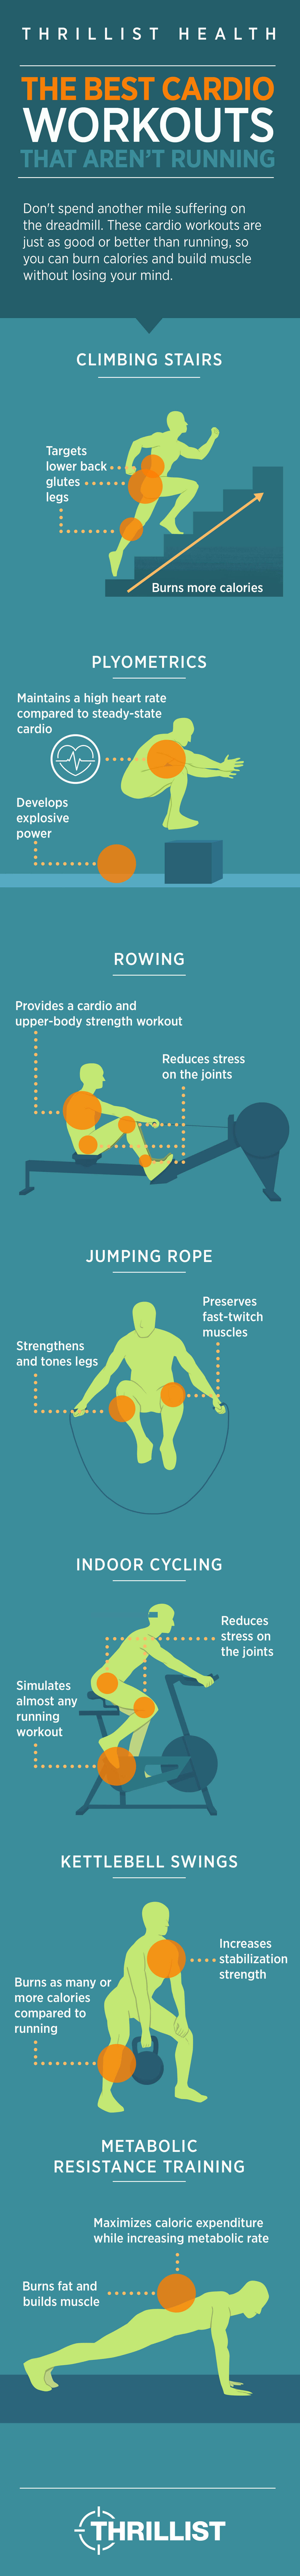 cardio workout infographic pin